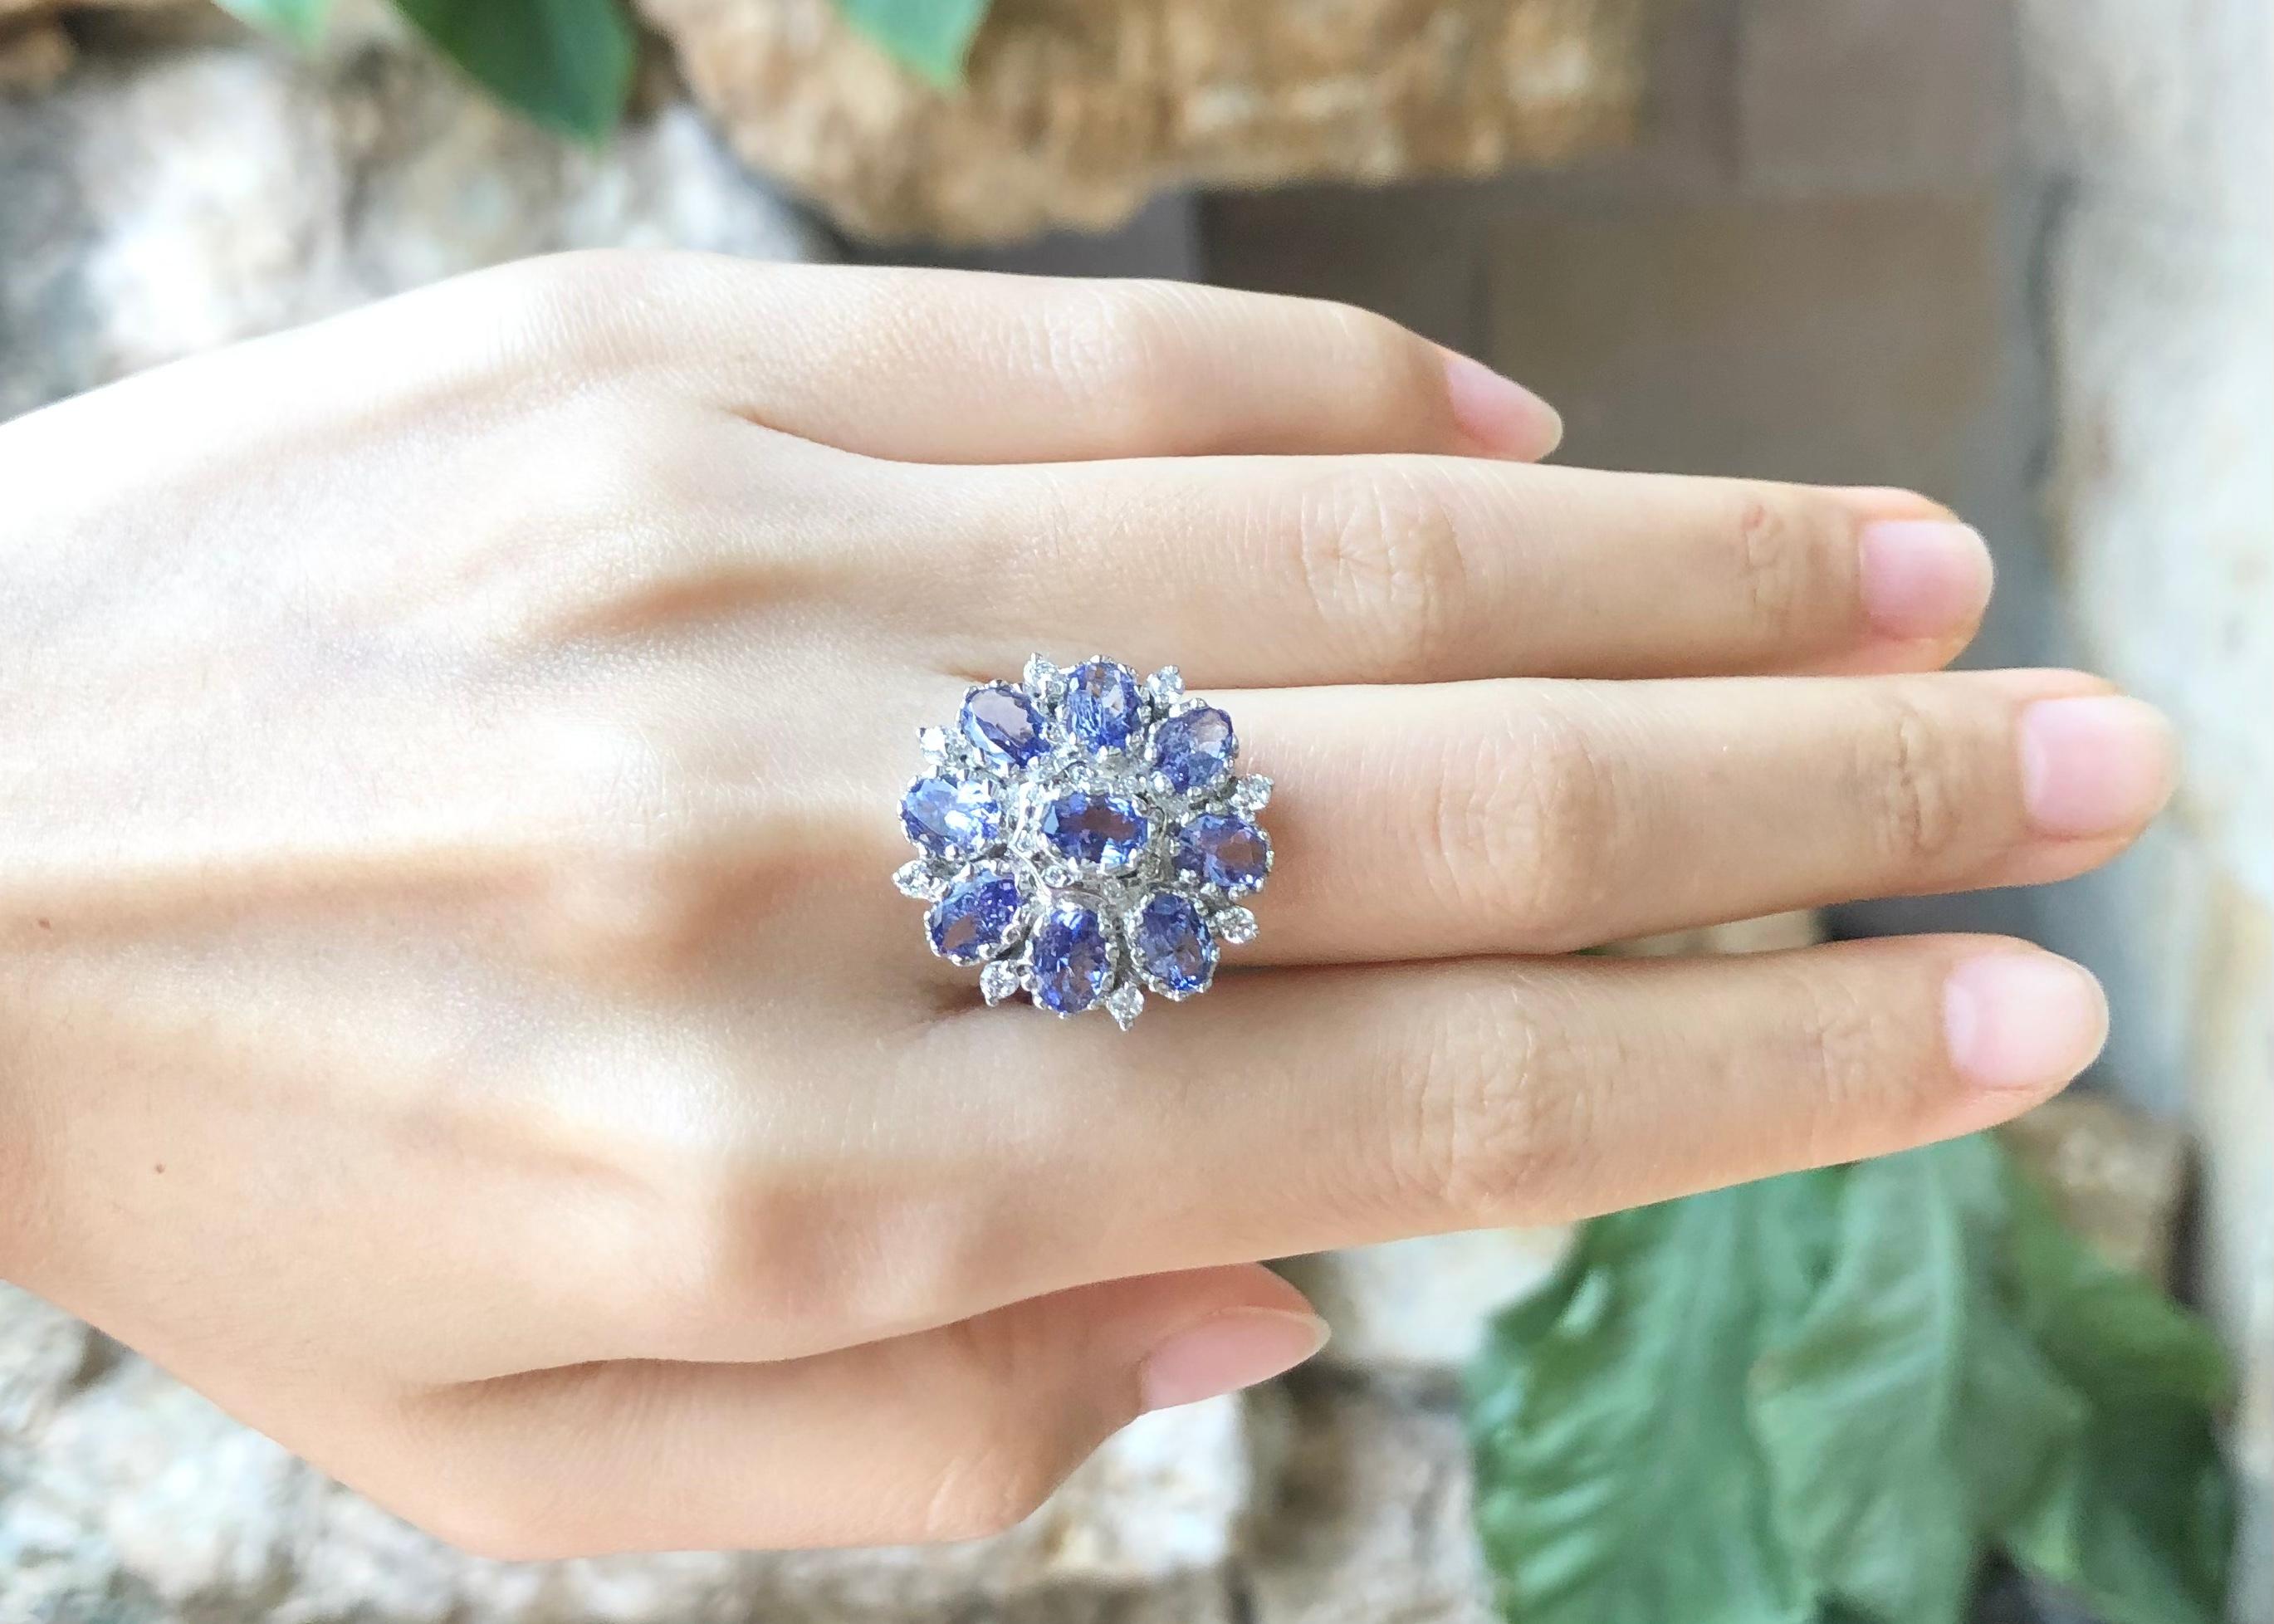 Tanzanite with Cubic Zirconia Ring set in Silver Settings

Width:  2.2 cm 
Length: 2.2 cm
Ring Size: 58
Total Weight: 6.78 grams

*Please note that the silver setting is plated with rhodium to promote shine and help prevent oxidation.  However, with